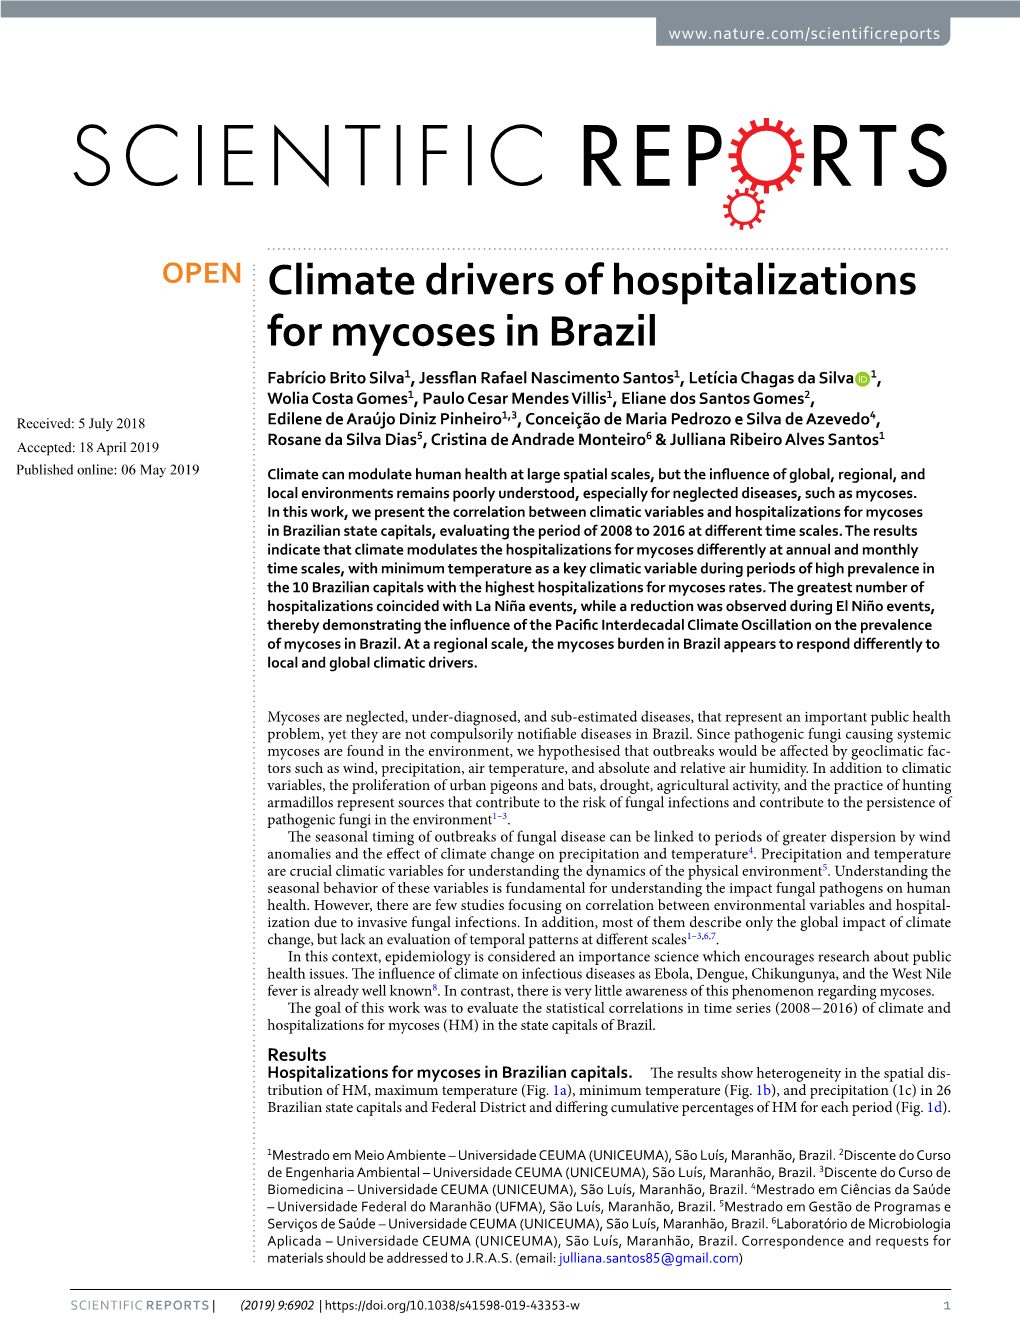 Climate Drivers of Hospitalizations for Mycoses in Brazil